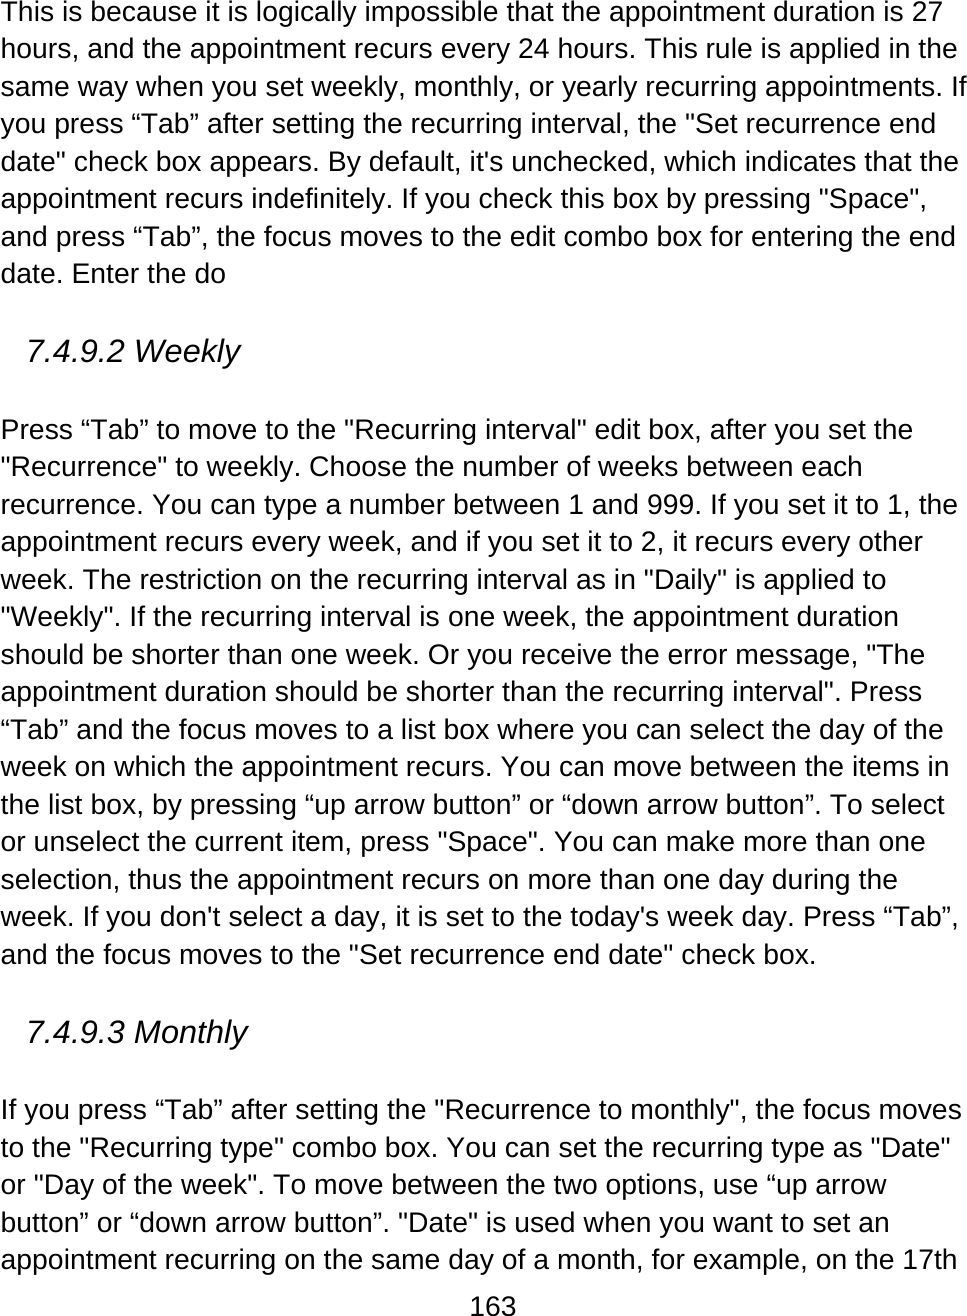 163  This is because it is logically impossible that the appointment duration is 27 hours, and the appointment recurs every 24 hours. This rule is applied in the same way when you set weekly, monthly, or yearly recurring appointments. If you press “Tab” after setting the recurring interval, the &quot;Set recurrence end date&quot; check box appears. By default, it&apos;s unchecked, which indicates that the appointment recurs indefinitely. If you check this box by pressing &quot;Space&quot;, and press “Tab”, the focus moves to the edit combo box for entering the end date. Enter the do  7.4.9.2 Weekly  Press “Tab” to move to the &quot;Recurring interval&quot; edit box, after you set the &quot;Recurrence&quot; to weekly. Choose the number of weeks between each recurrence. You can type a number between 1 and 999. If you set it to 1, the appointment recurs every week, and if you set it to 2, it recurs every other week. The restriction on the recurring interval as in &quot;Daily&quot; is applied to &quot;Weekly&quot;. If the recurring interval is one week, the appointment duration should be shorter than one week. Or you receive the error message, &quot;The appointment duration should be shorter than the recurring interval&quot;. Press “Tab” and the focus moves to a list box where you can select the day of the week on which the appointment recurs. You can move between the items in the list box, by pressing “up arrow button” or “down arrow button”. To select or unselect the current item, press &quot;Space&quot;. You can make more than one selection, thus the appointment recurs on more than one day during the week. If you don&apos;t select a day, it is set to the today&apos;s week day. Press “Tab”, and the focus moves to the &quot;Set recurrence end date&quot; check box.   7.4.9.3 Monthly  If you press “Tab” after setting the &quot;Recurrence to monthly&quot;, the focus moves to the &quot;Recurring type&quot; combo box. You can set the recurring type as &quot;Date&quot; or &quot;Day of the week&quot;. To move between the two options, use “up arrow button” or “down arrow button”. &quot;Date&quot; is used when you want to set an appointment recurring on the same day of a month, for example, on the 17th 